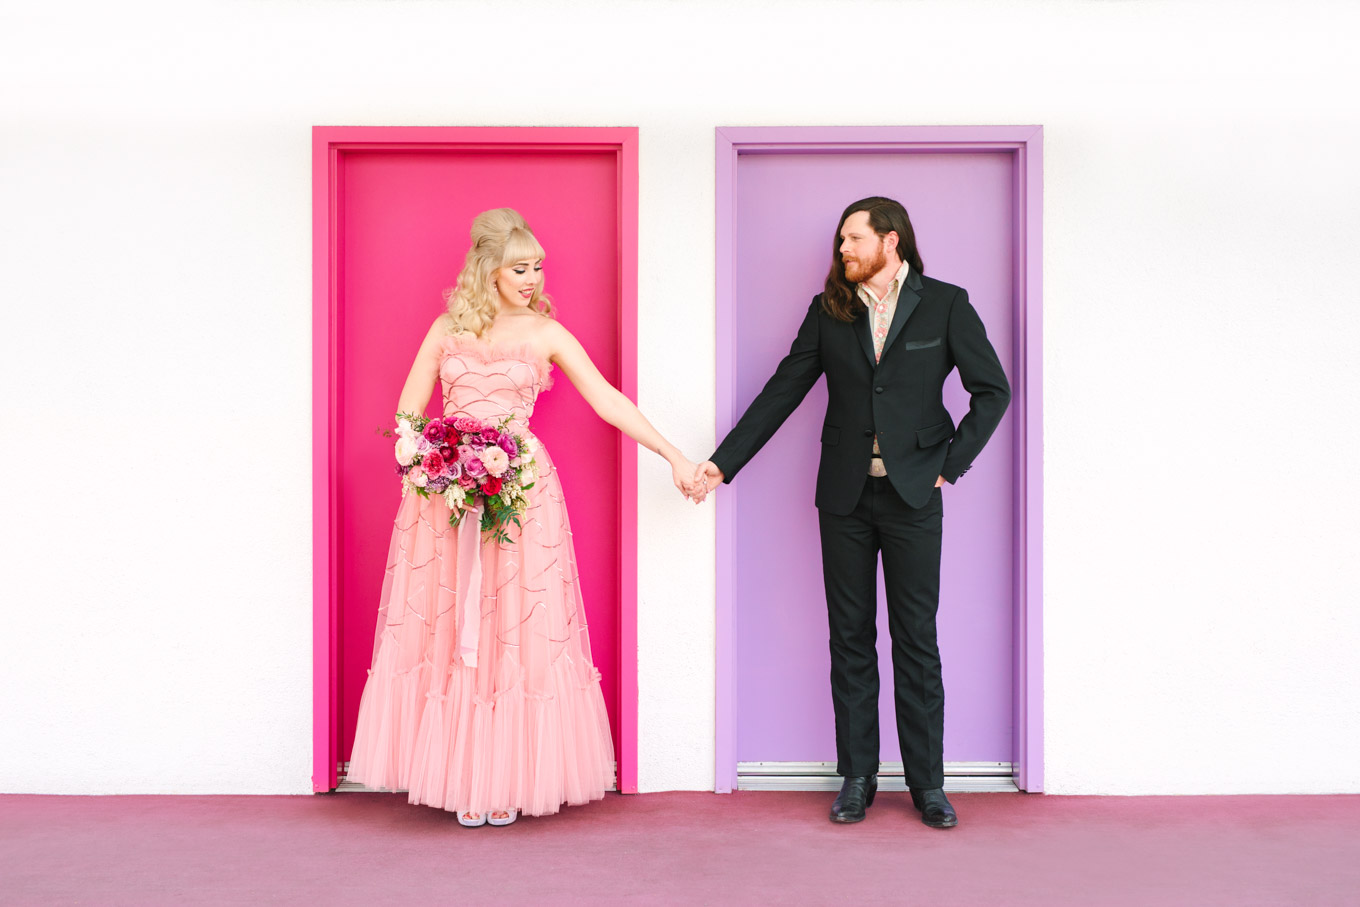 Retro couple with colorful Saguaro Hotel doors. Modern vintage-inspired Palm Springs engagement session with a 1960s pink Cadillac, retro clothing, and flowers by Shindig Chic. | Colorful and elevated wedding inspiration for fun-loving couples in Southern California | #engagementsession #PalmSpringsengagement #vintageweddingdress #floralcar #pinkcar   Source: Mary Costa Photography | Los Angeles